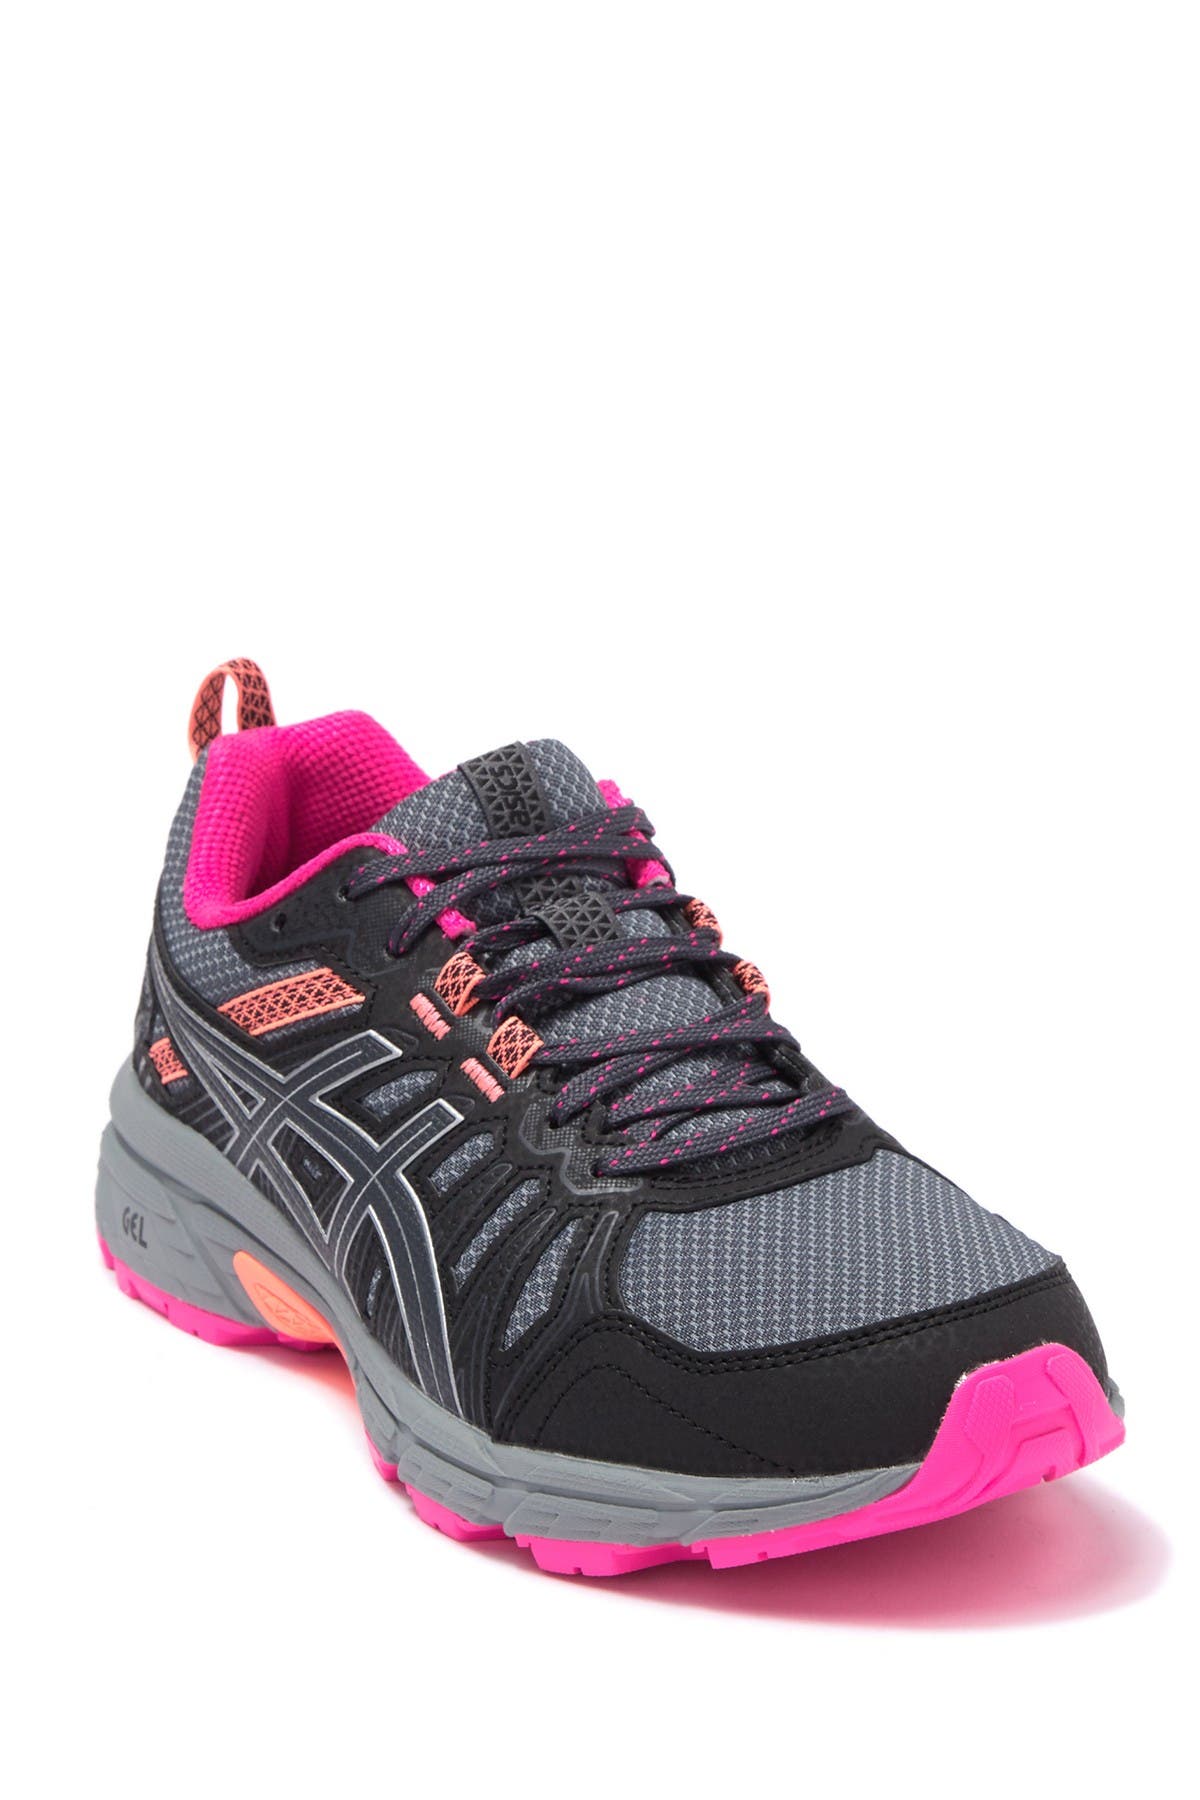 nordstrom womens walking shoes